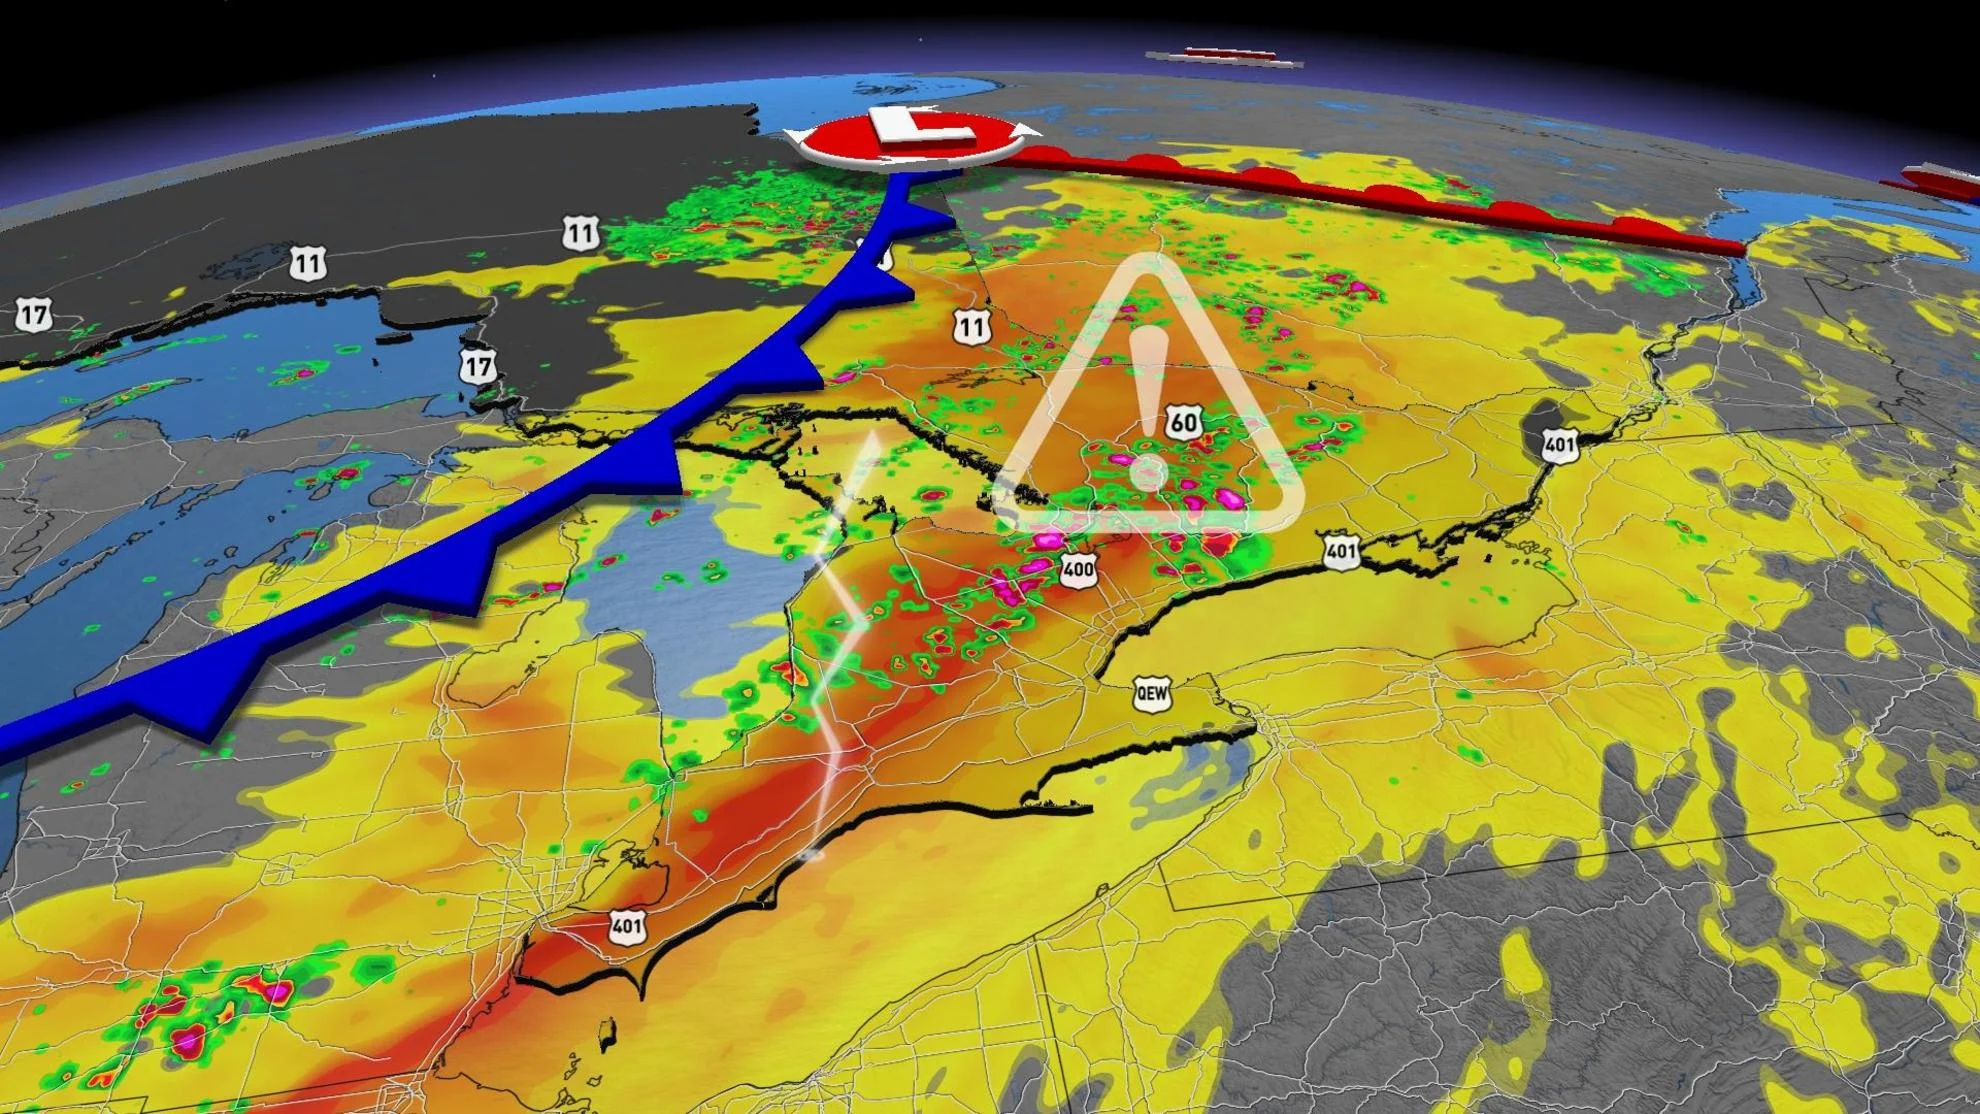 All eyes on Thursday for a severe thunderstorm threat across parts of Quebec. Risk for large hail, strong winds, and tornadoes. Latest, here